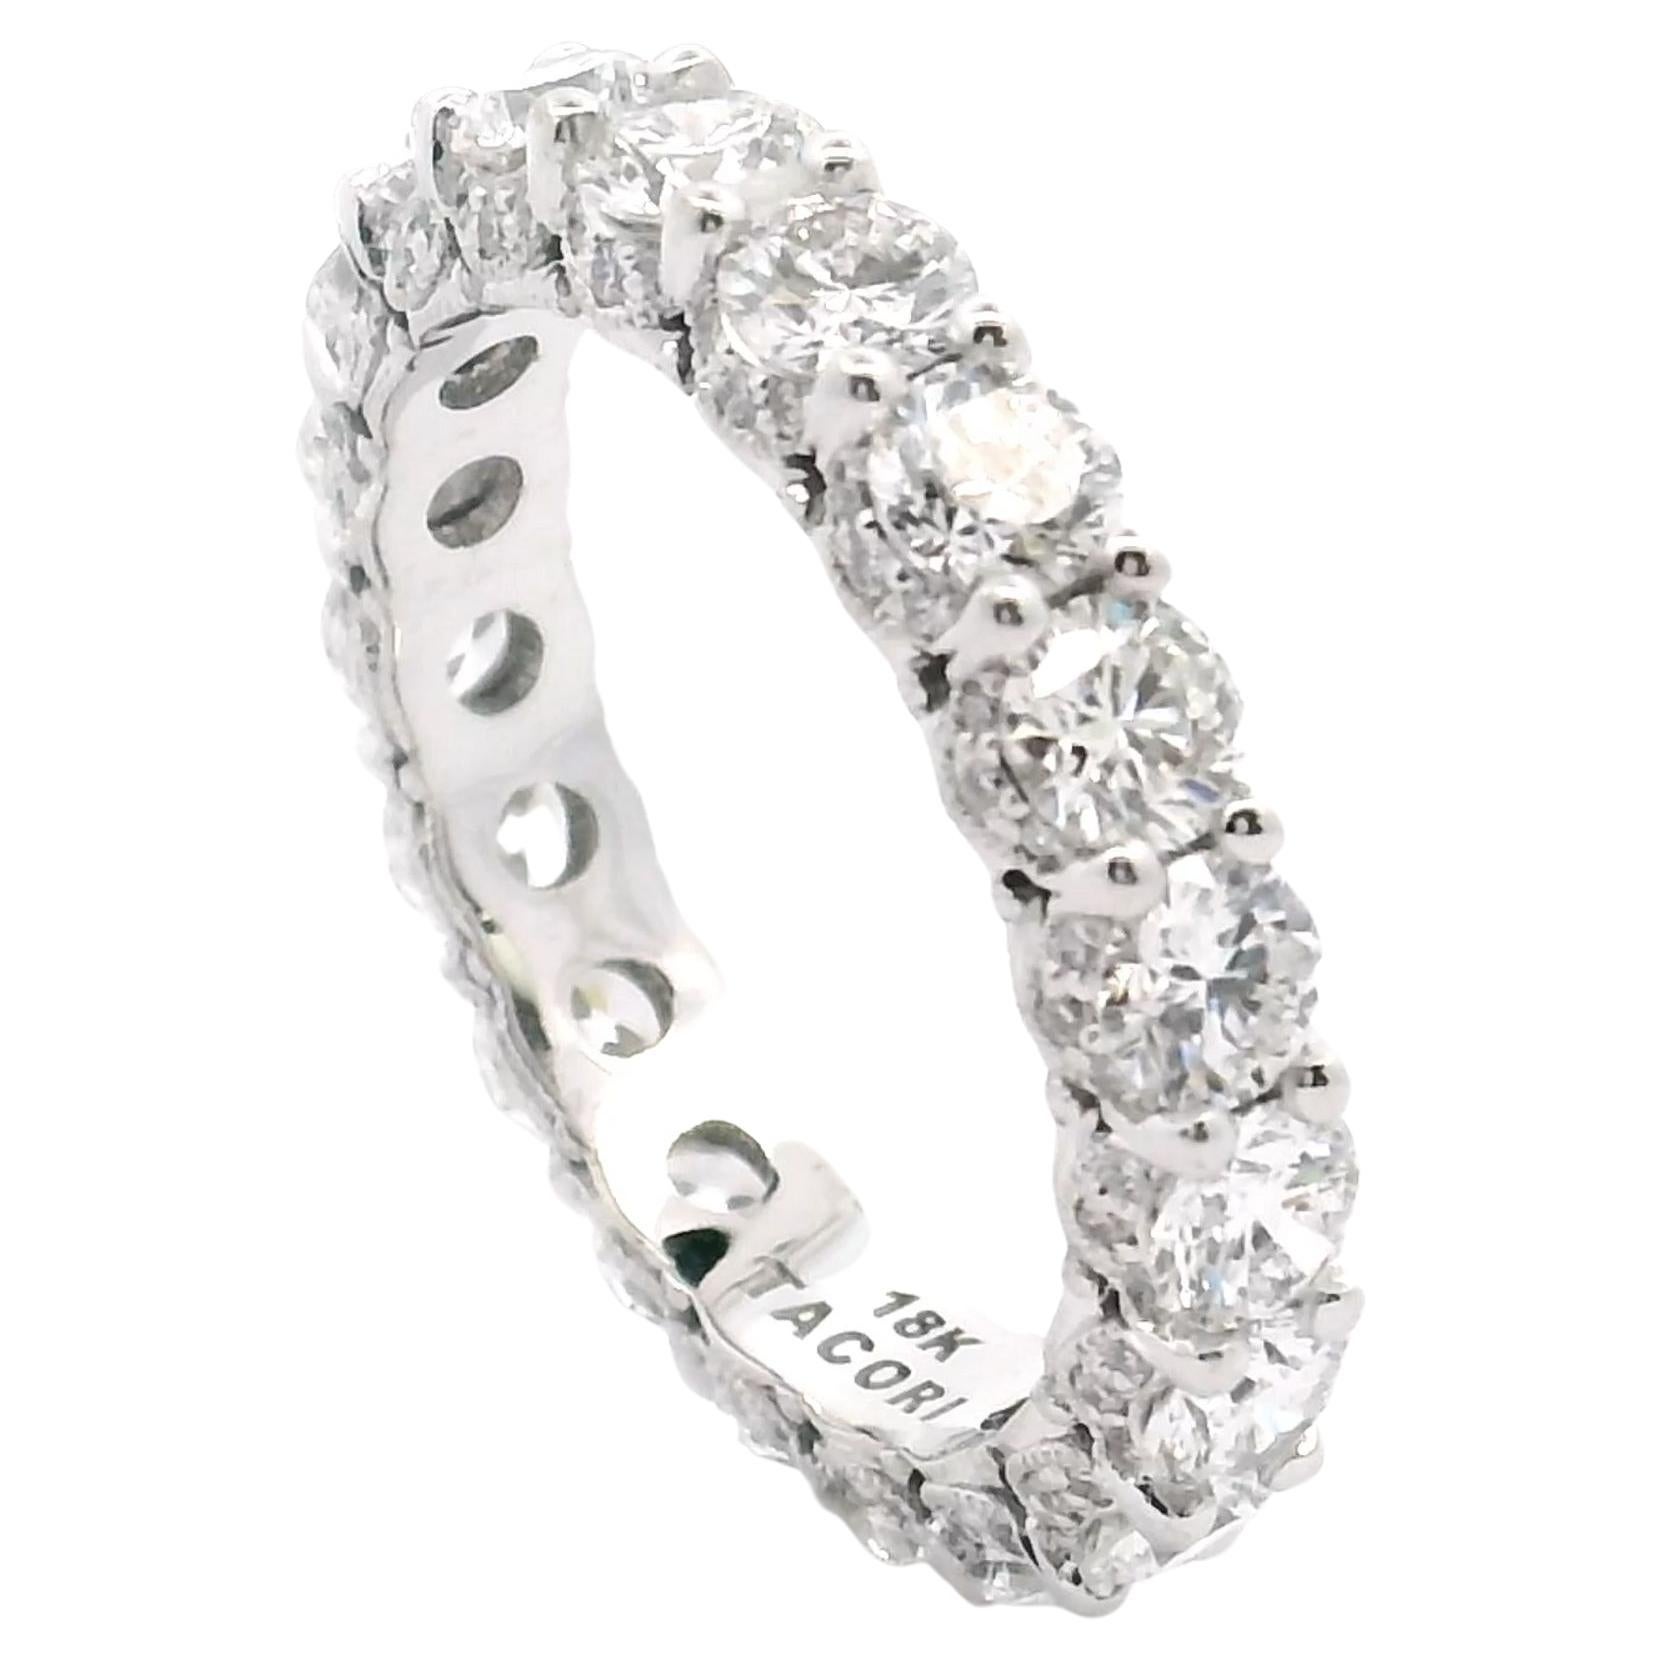 Tacori HT2632 18k white gold eternity ring with round diamonds totaling 3.20 carats, G color, VS cloarity.  This hand engraved ring is part of the designer's 'Royal T' collection. The side profile showcases Tacori's signature crescent design, with